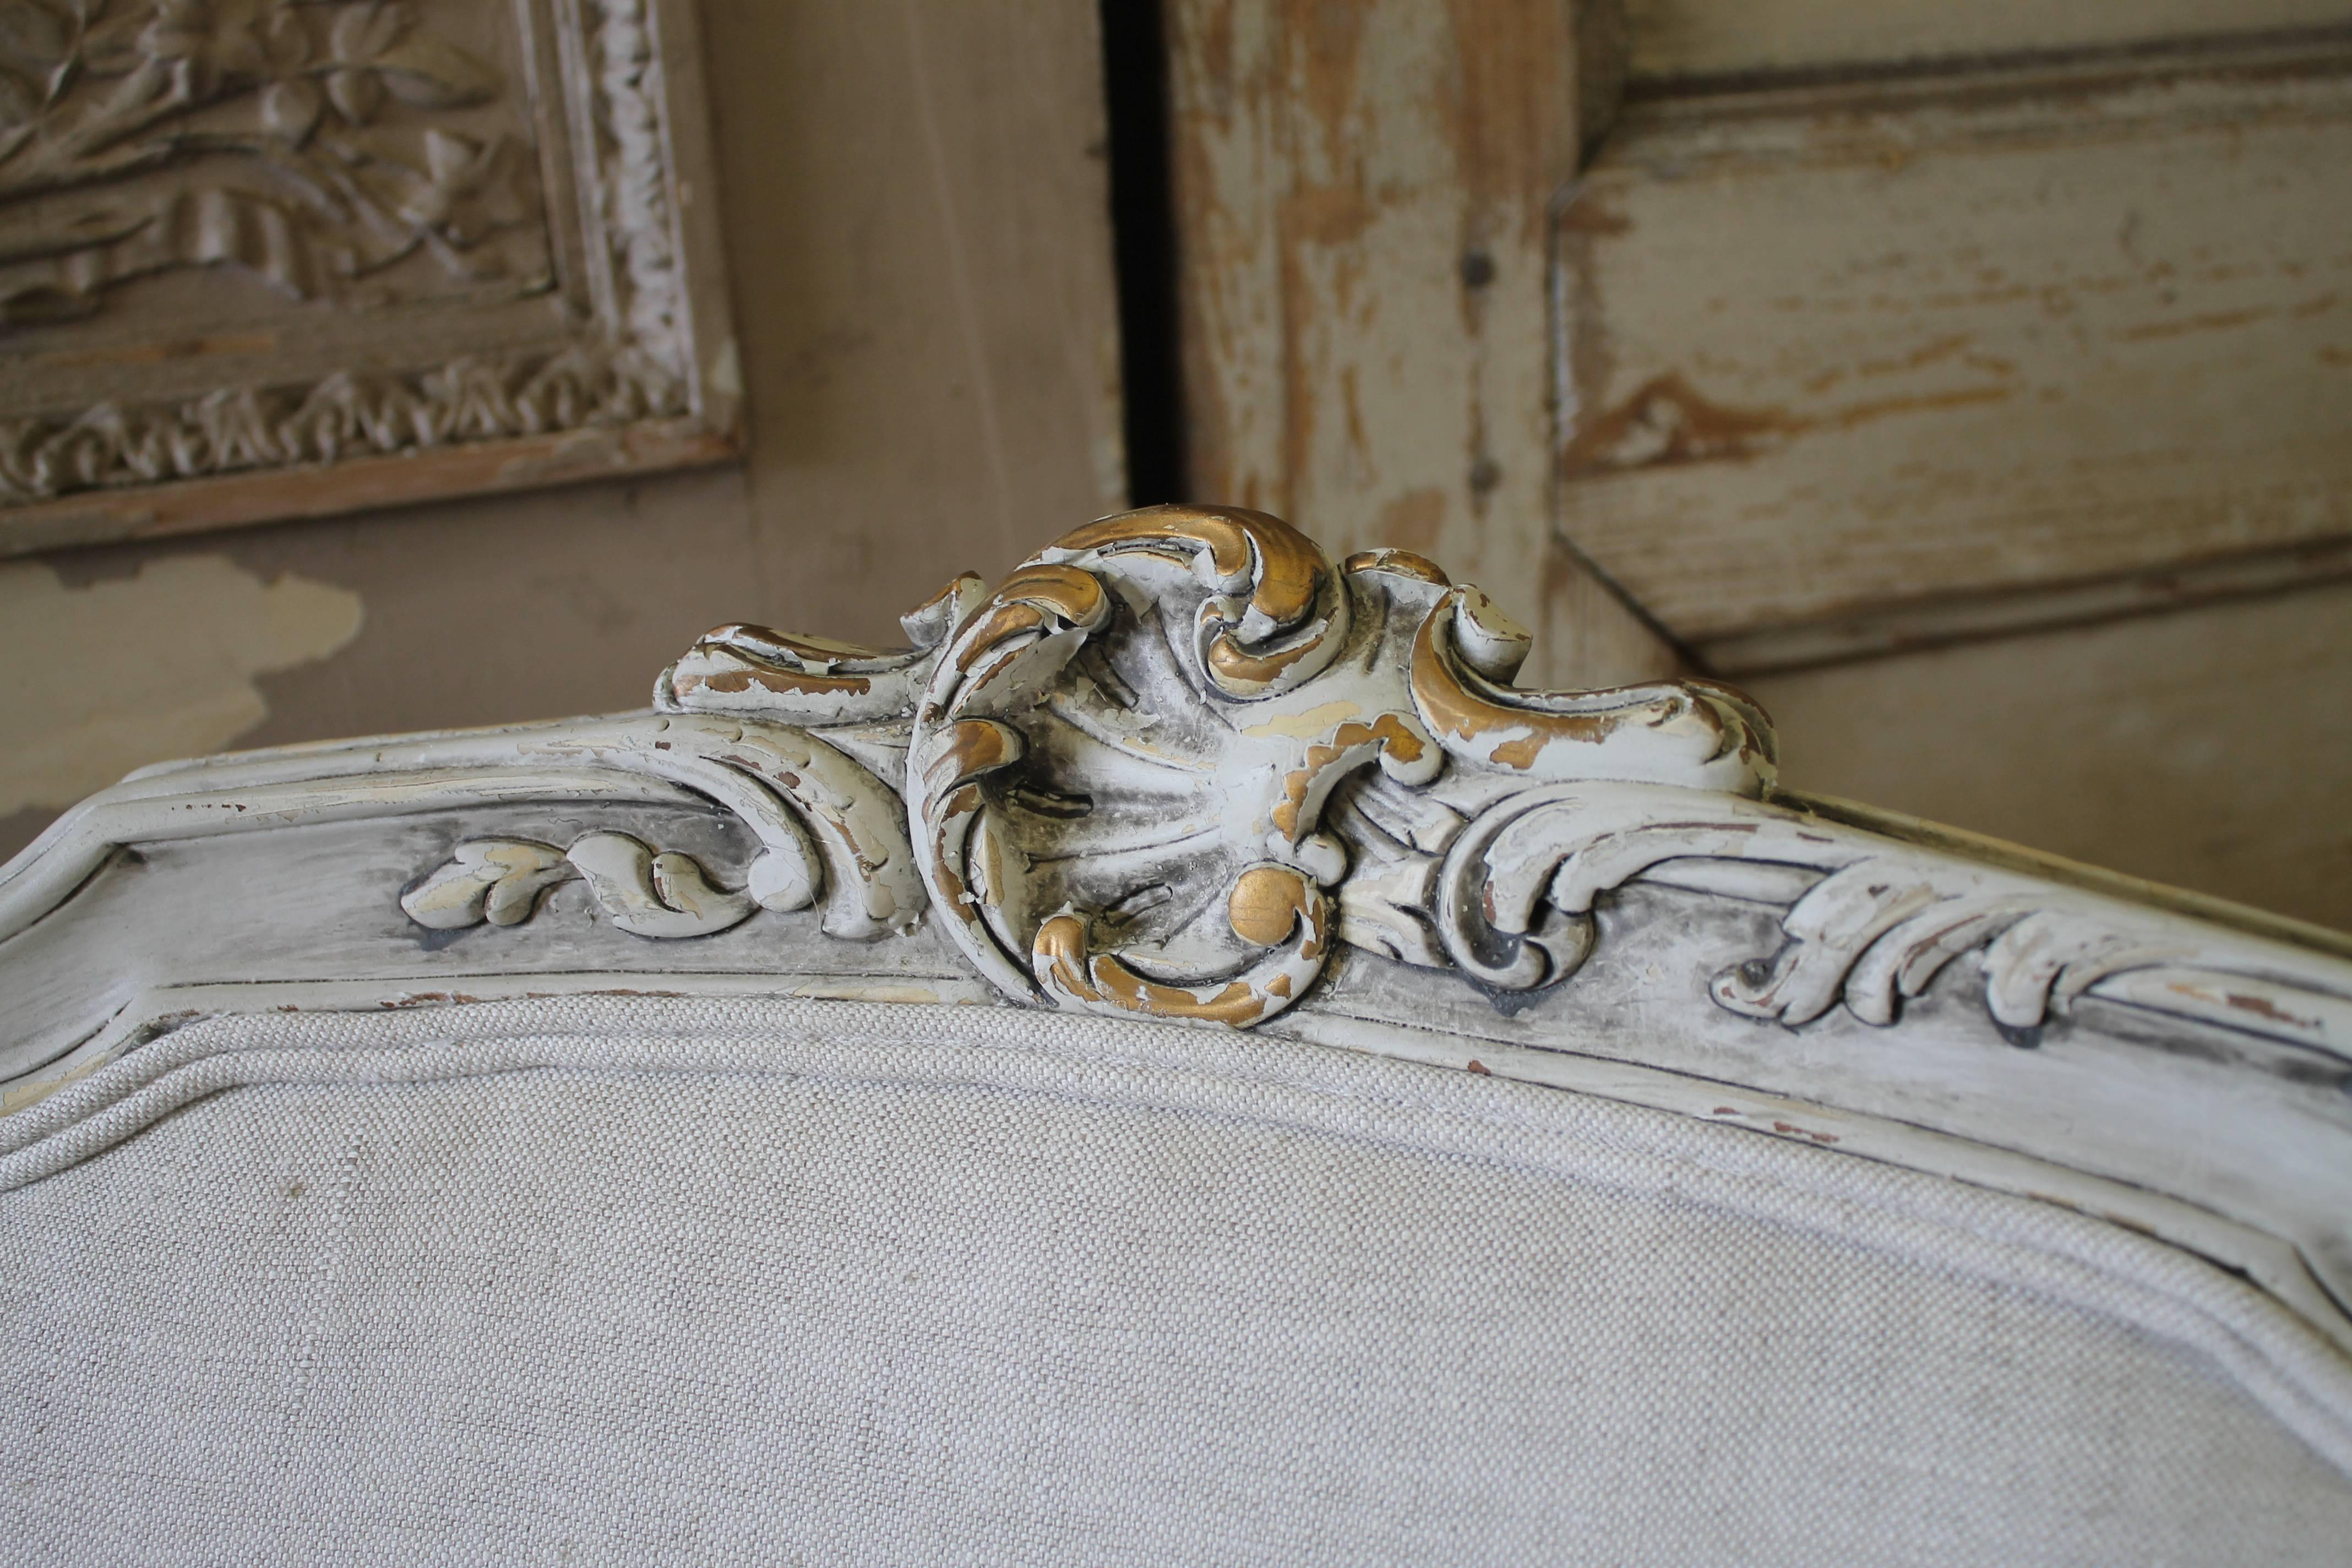 A beautiful French chair with matching ottoman we have painted in a soft oyster white, with subtle distressed edges, and finished with an antique glazed patina. The end result is a soft subtle pale grey tone that blends with everything. We